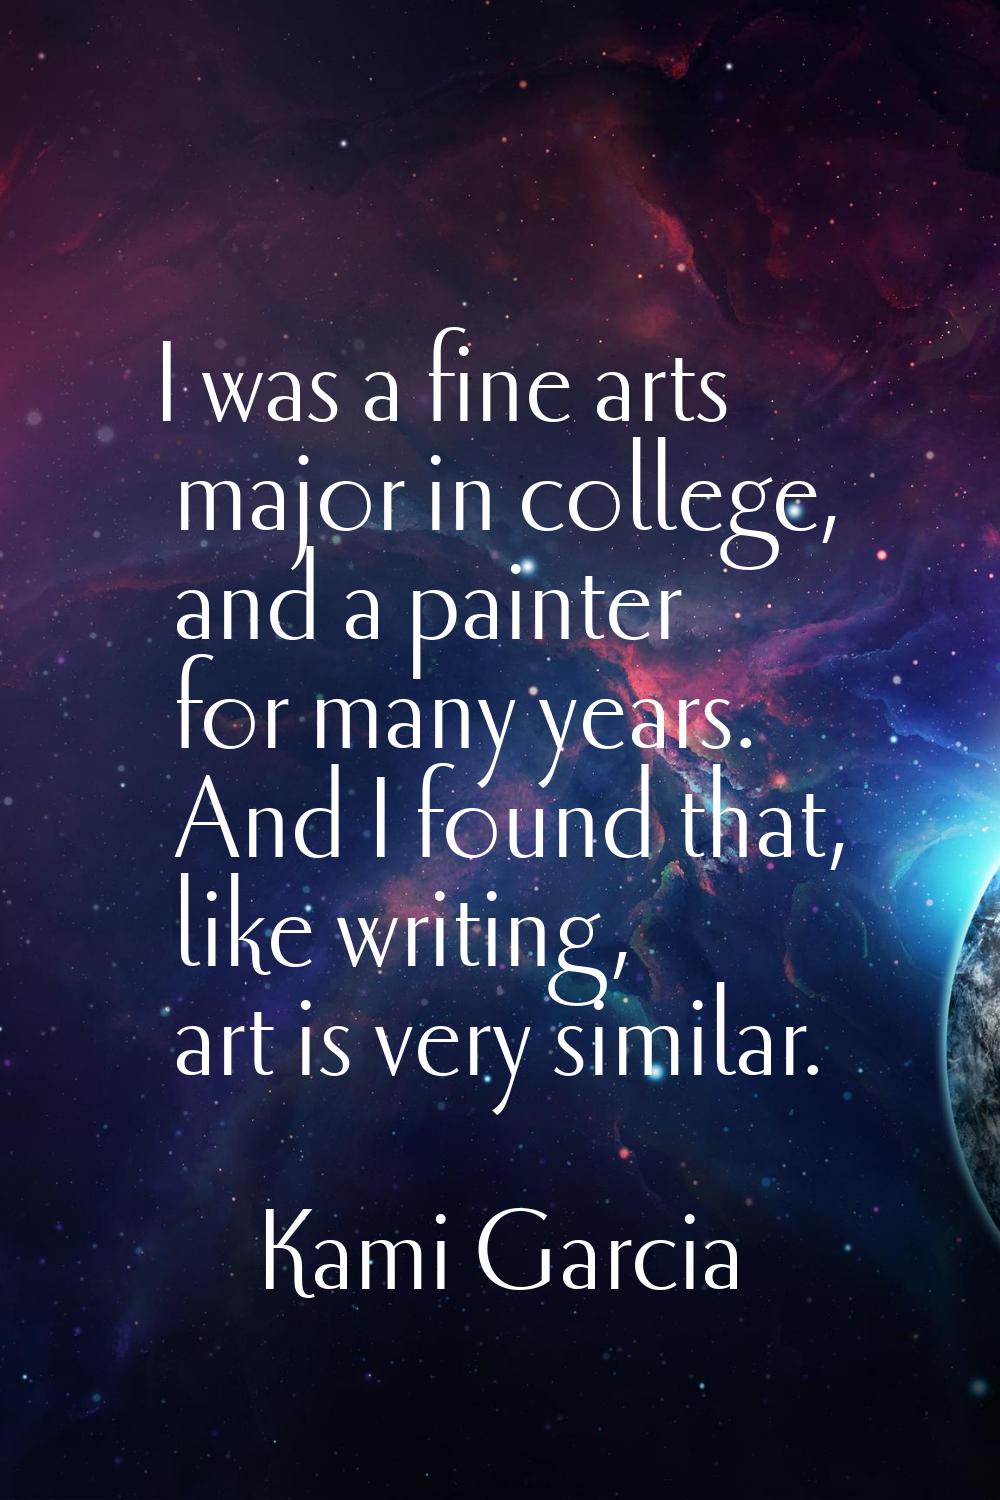 I was a fine arts major in college, and a painter for many years. And I found that, like writing, a